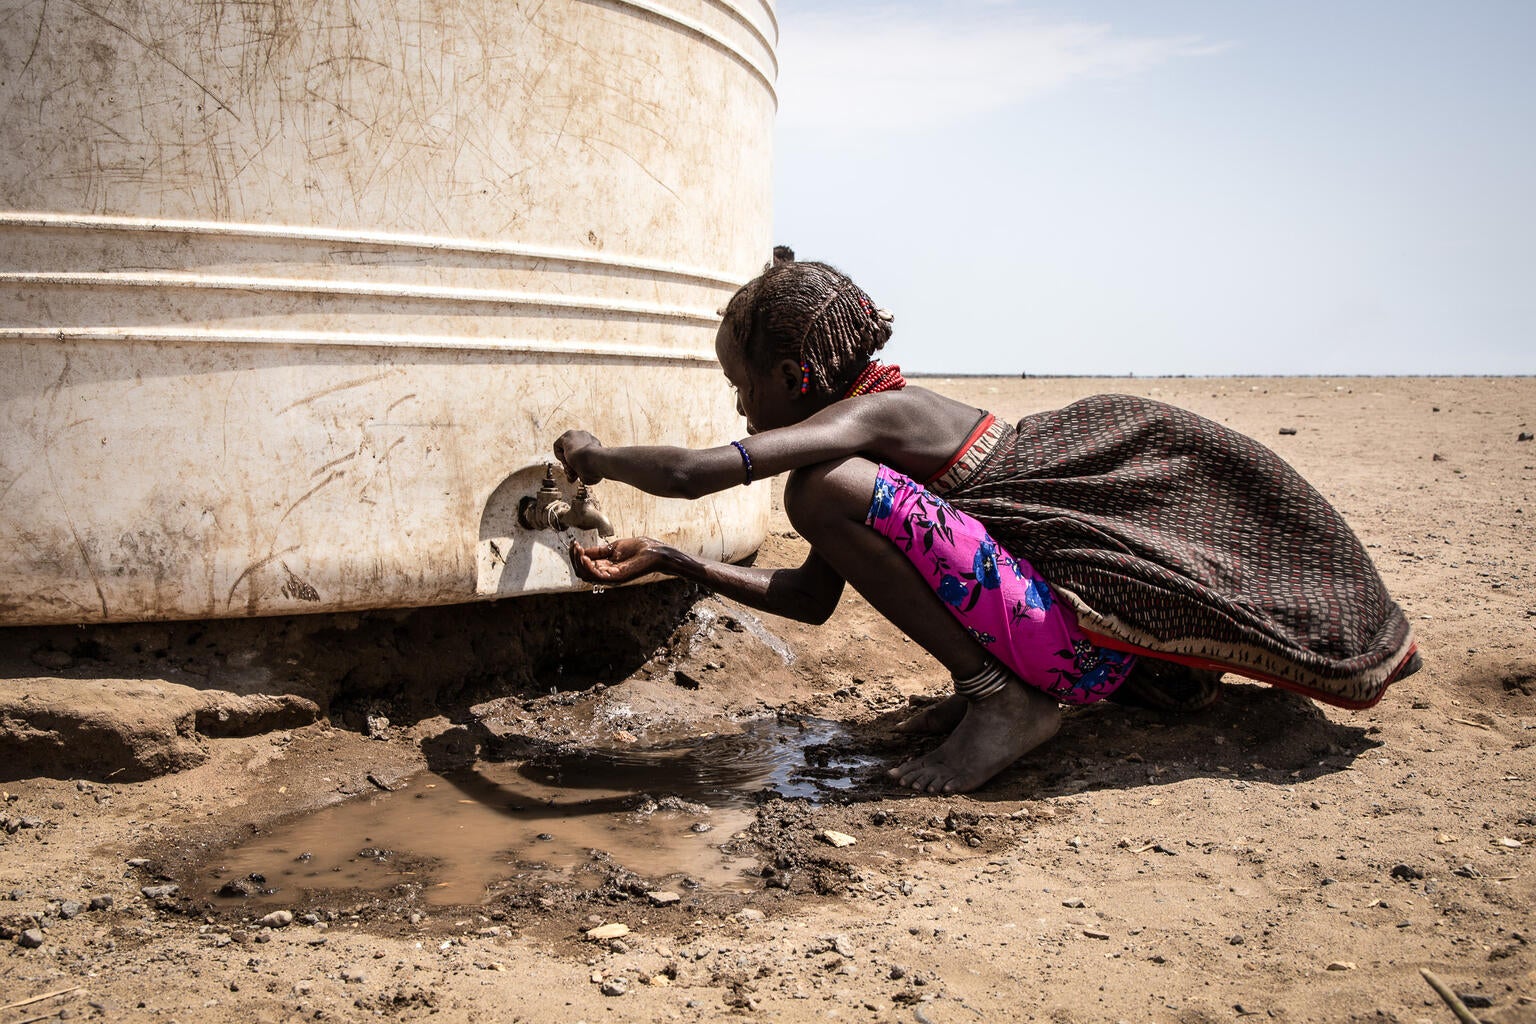 Mother and child in Ethiopia experiencing a prolonged drought